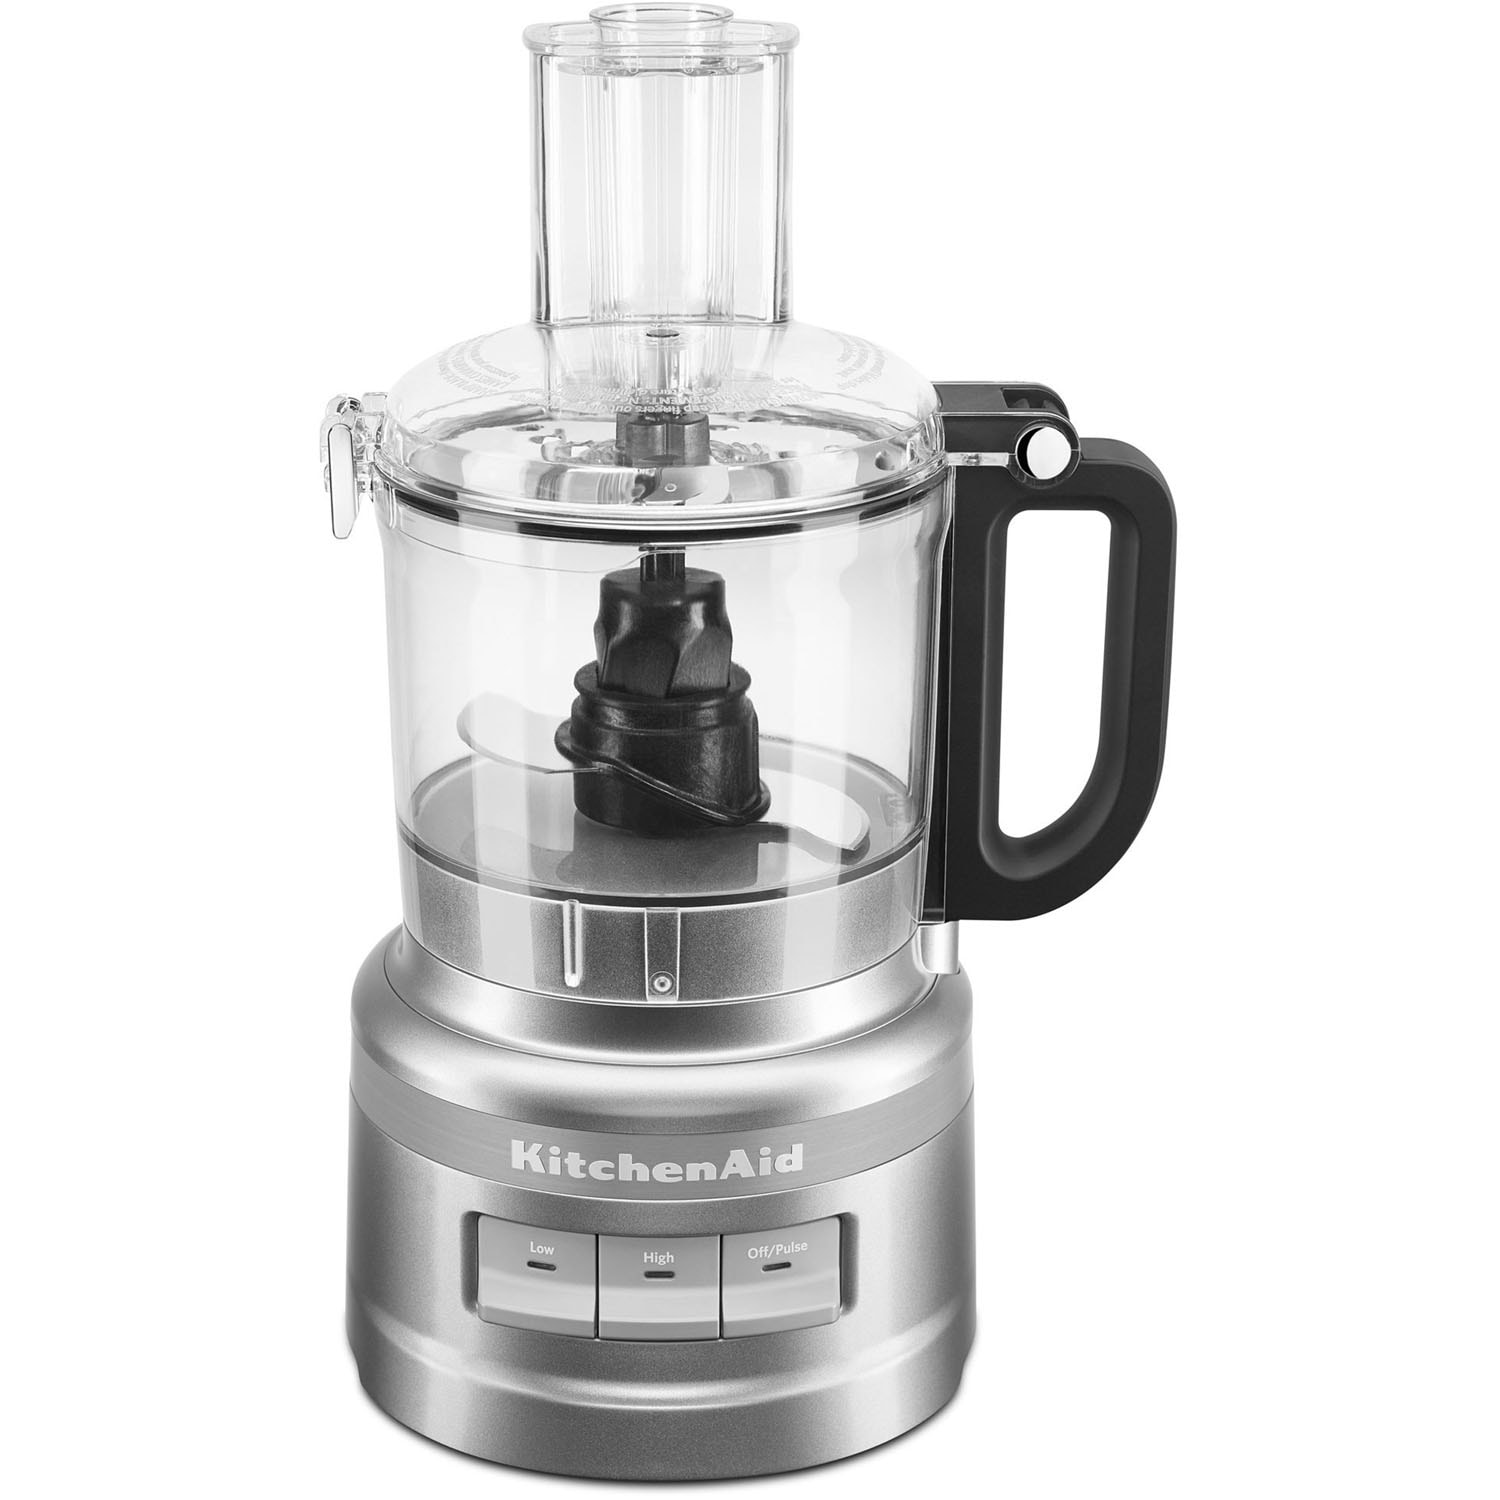 7-Cup Black Food Processor With Spiralizer